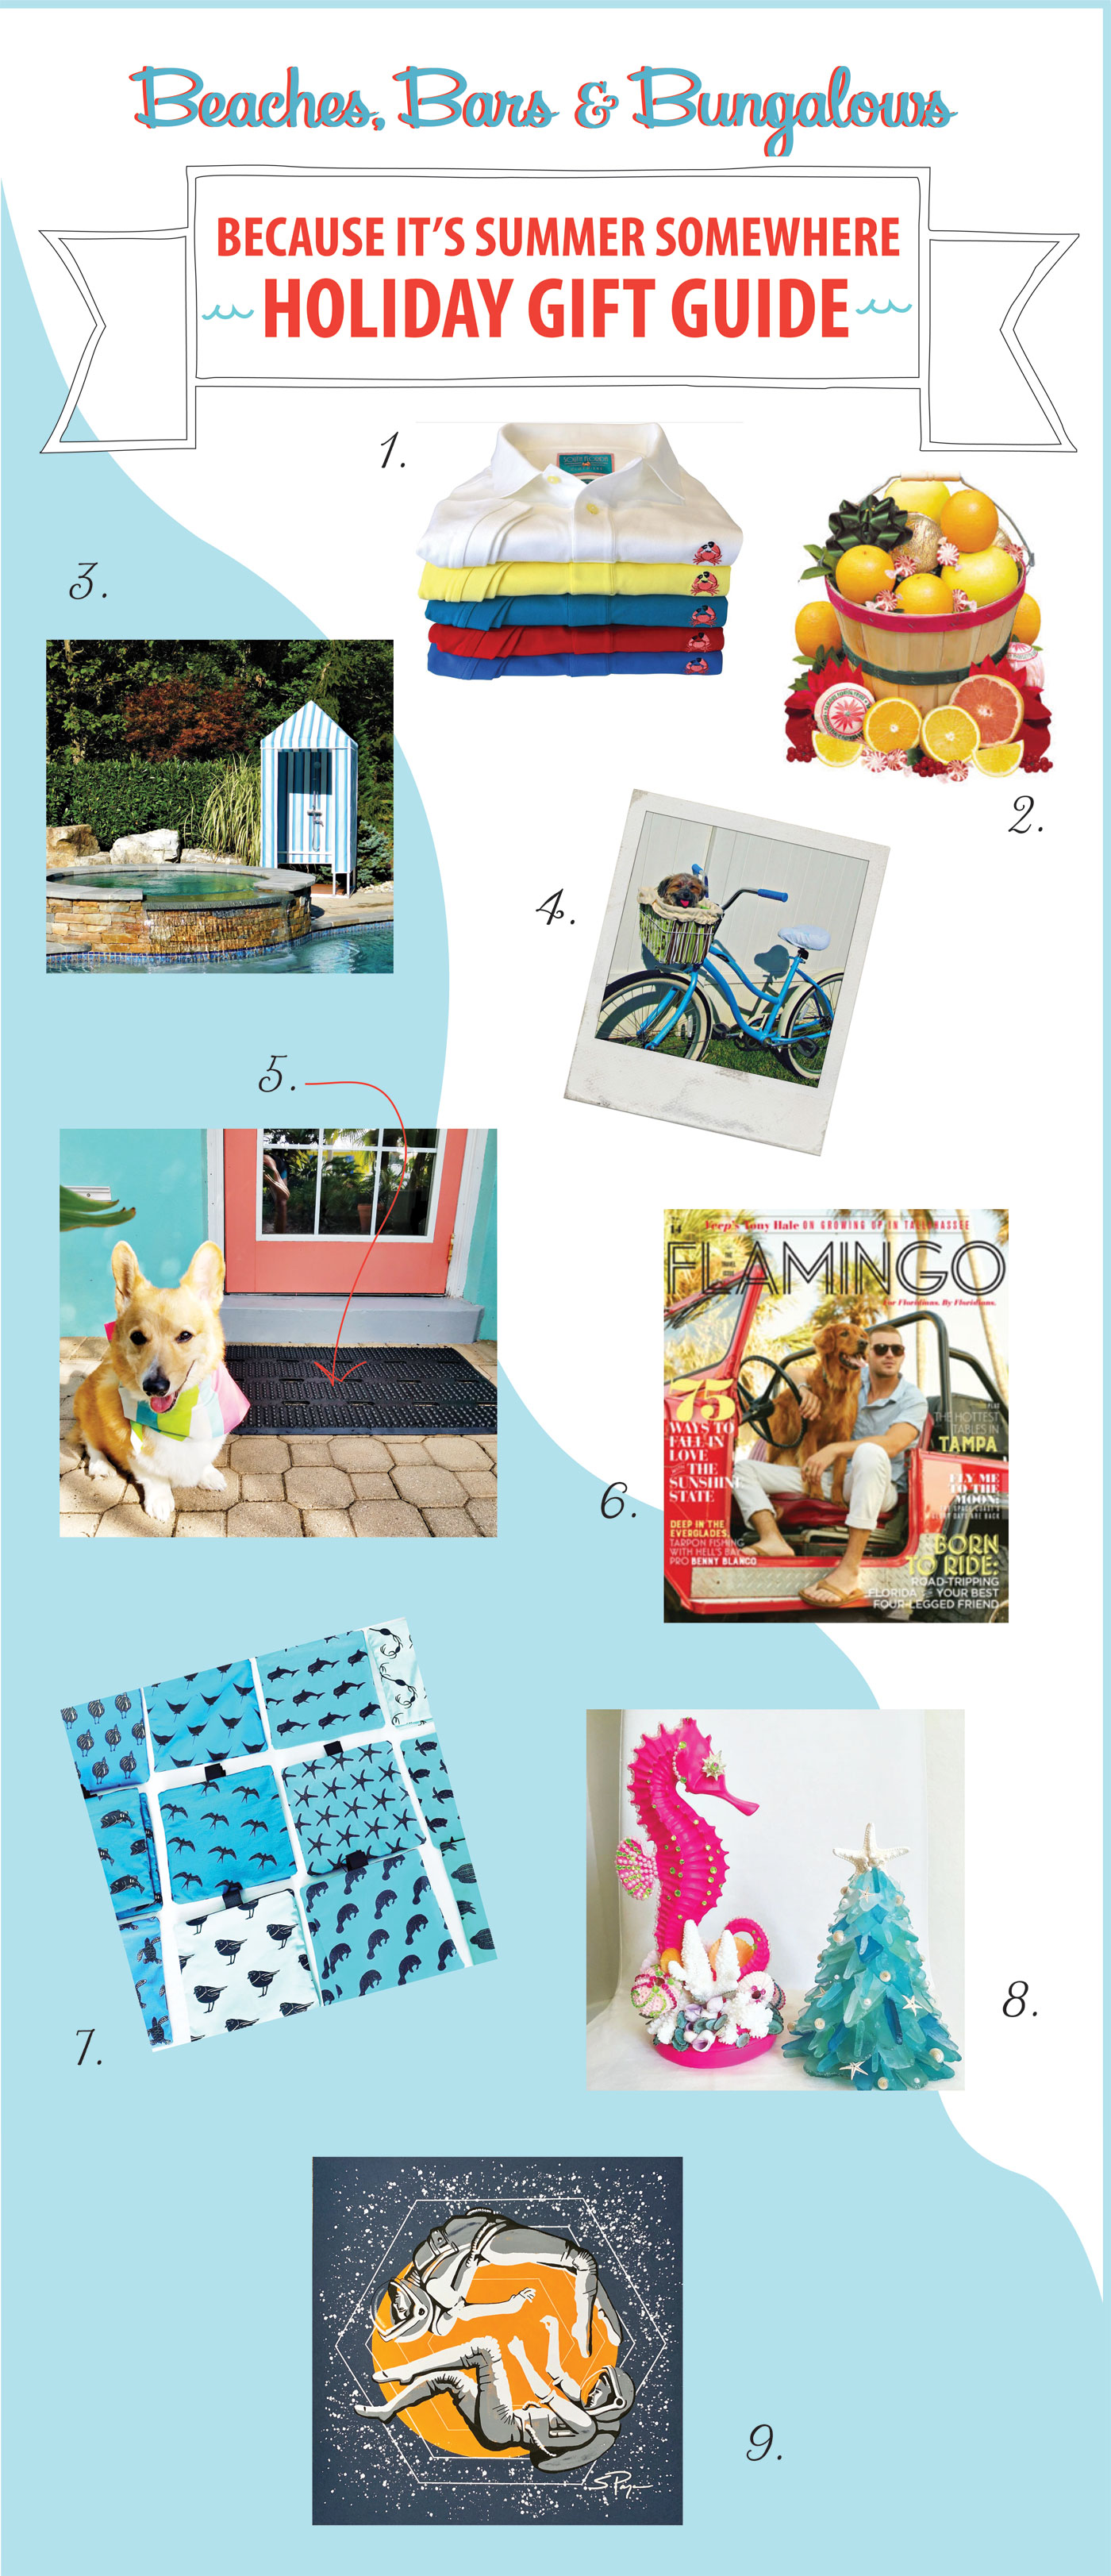 Beaches Bars and Bungalows Because It's Summer Somewhere Holiday Gift Guide